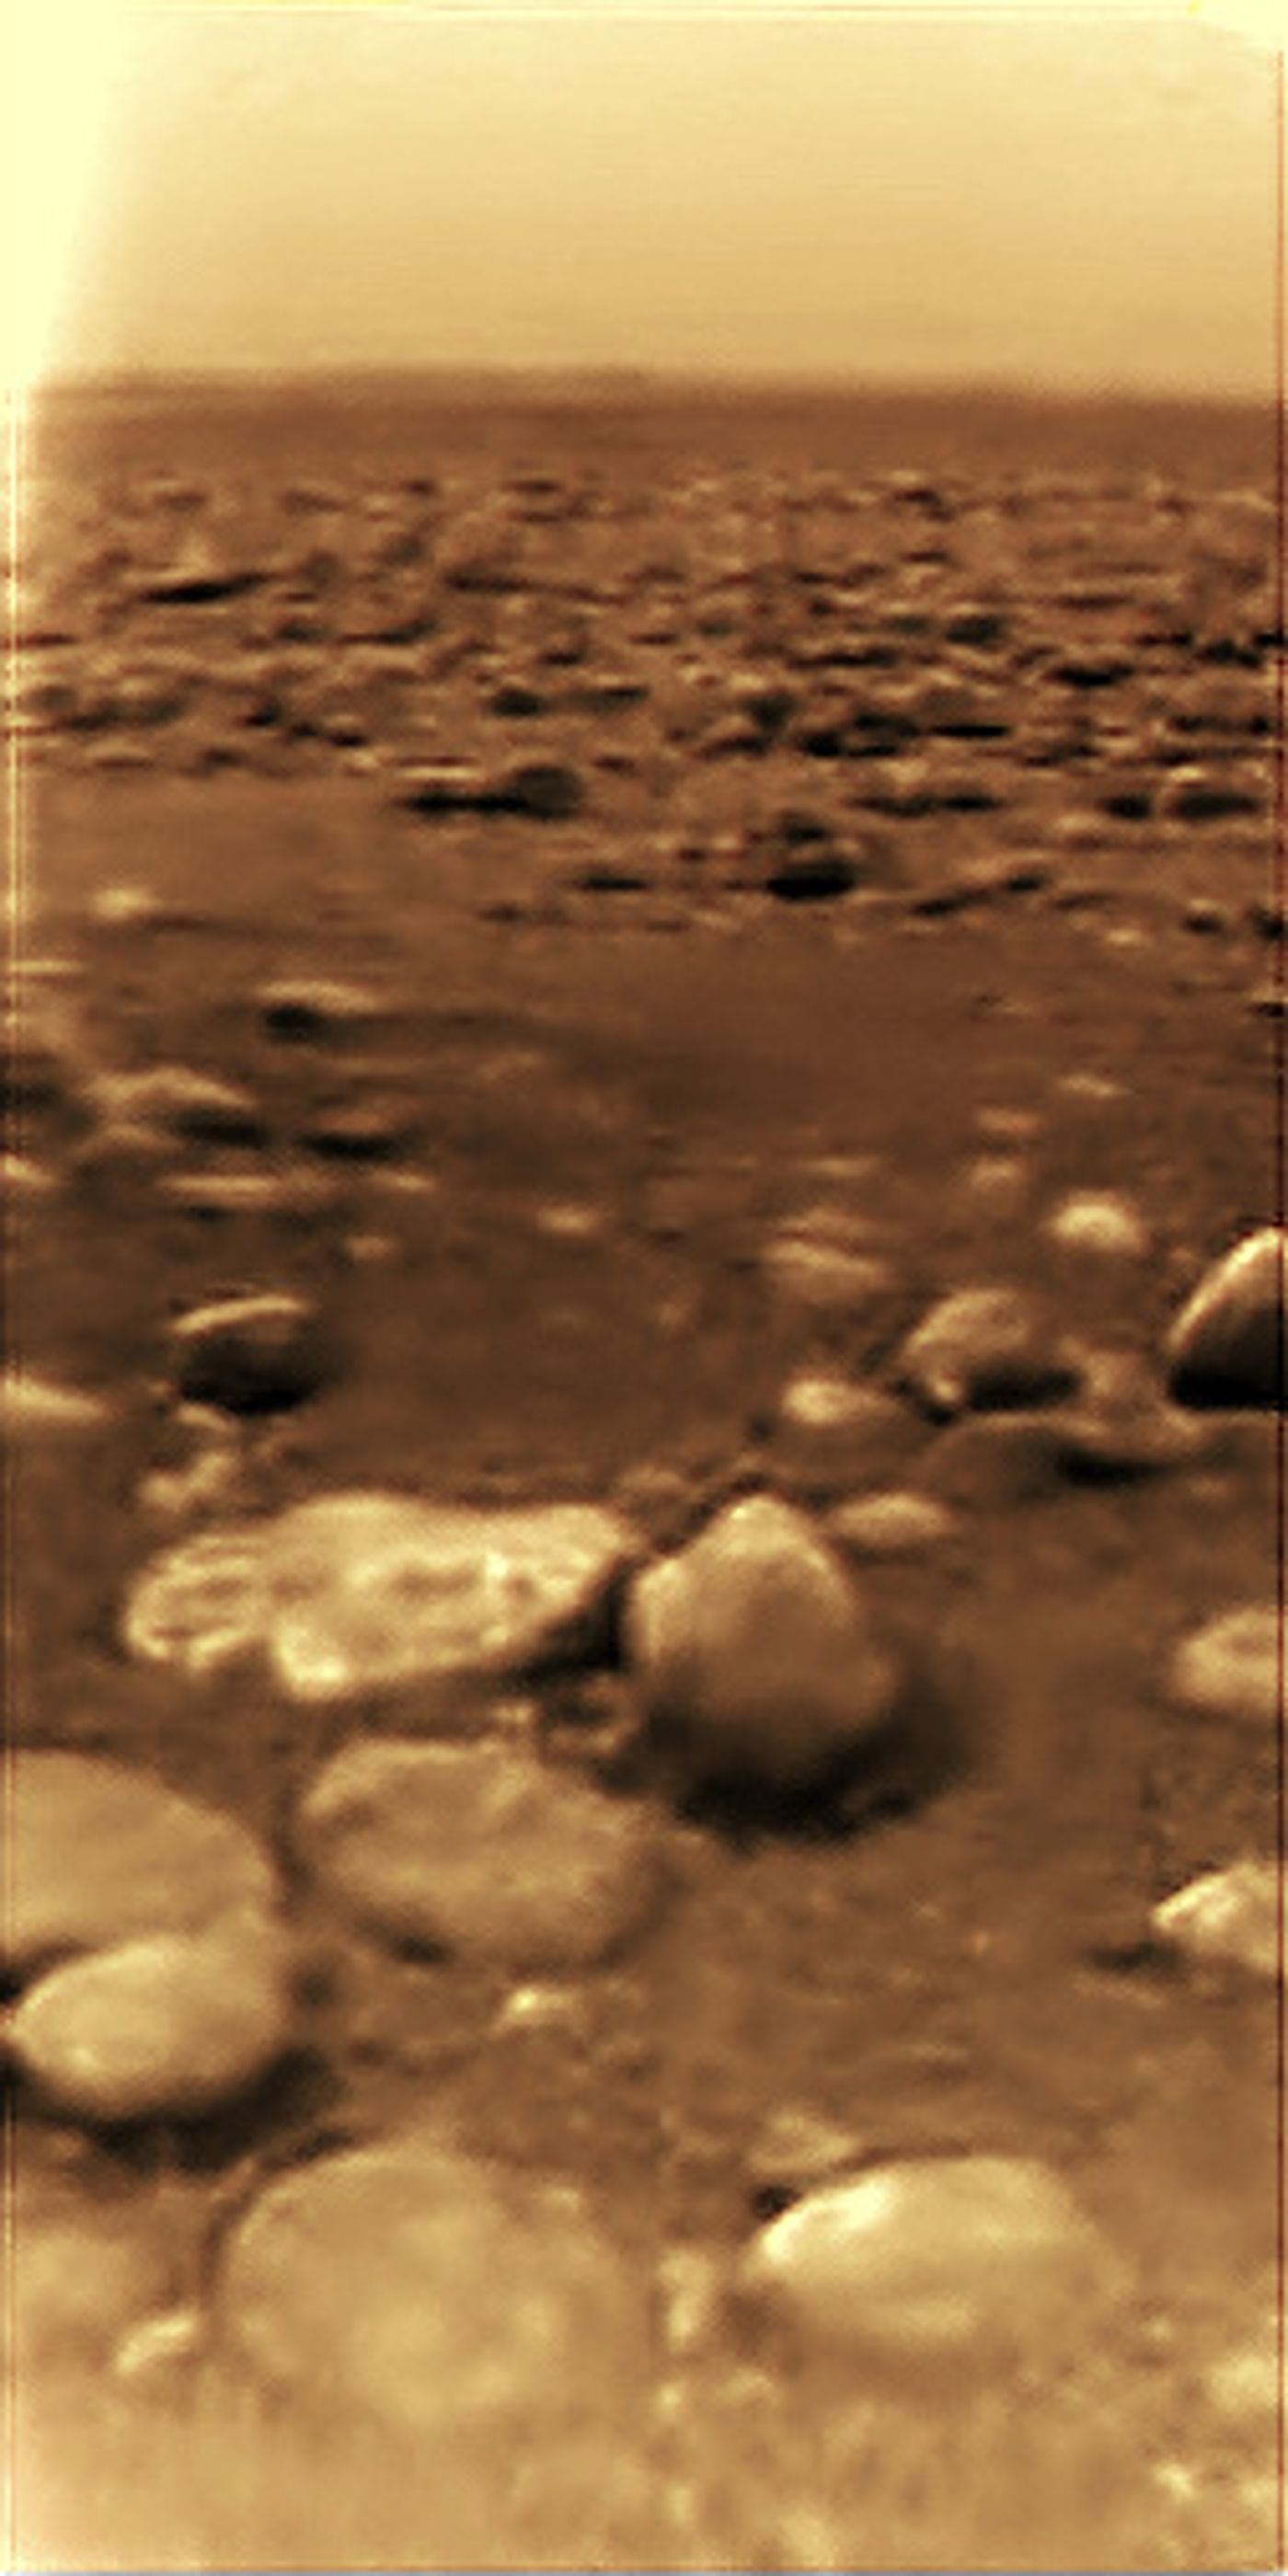 Contrast-enhanced image of Titan's surface taken by the Huygens probe. Image Credit: European Space Agency/NASA/JPL/University of Arizona; processed by Andrey Pivovarov